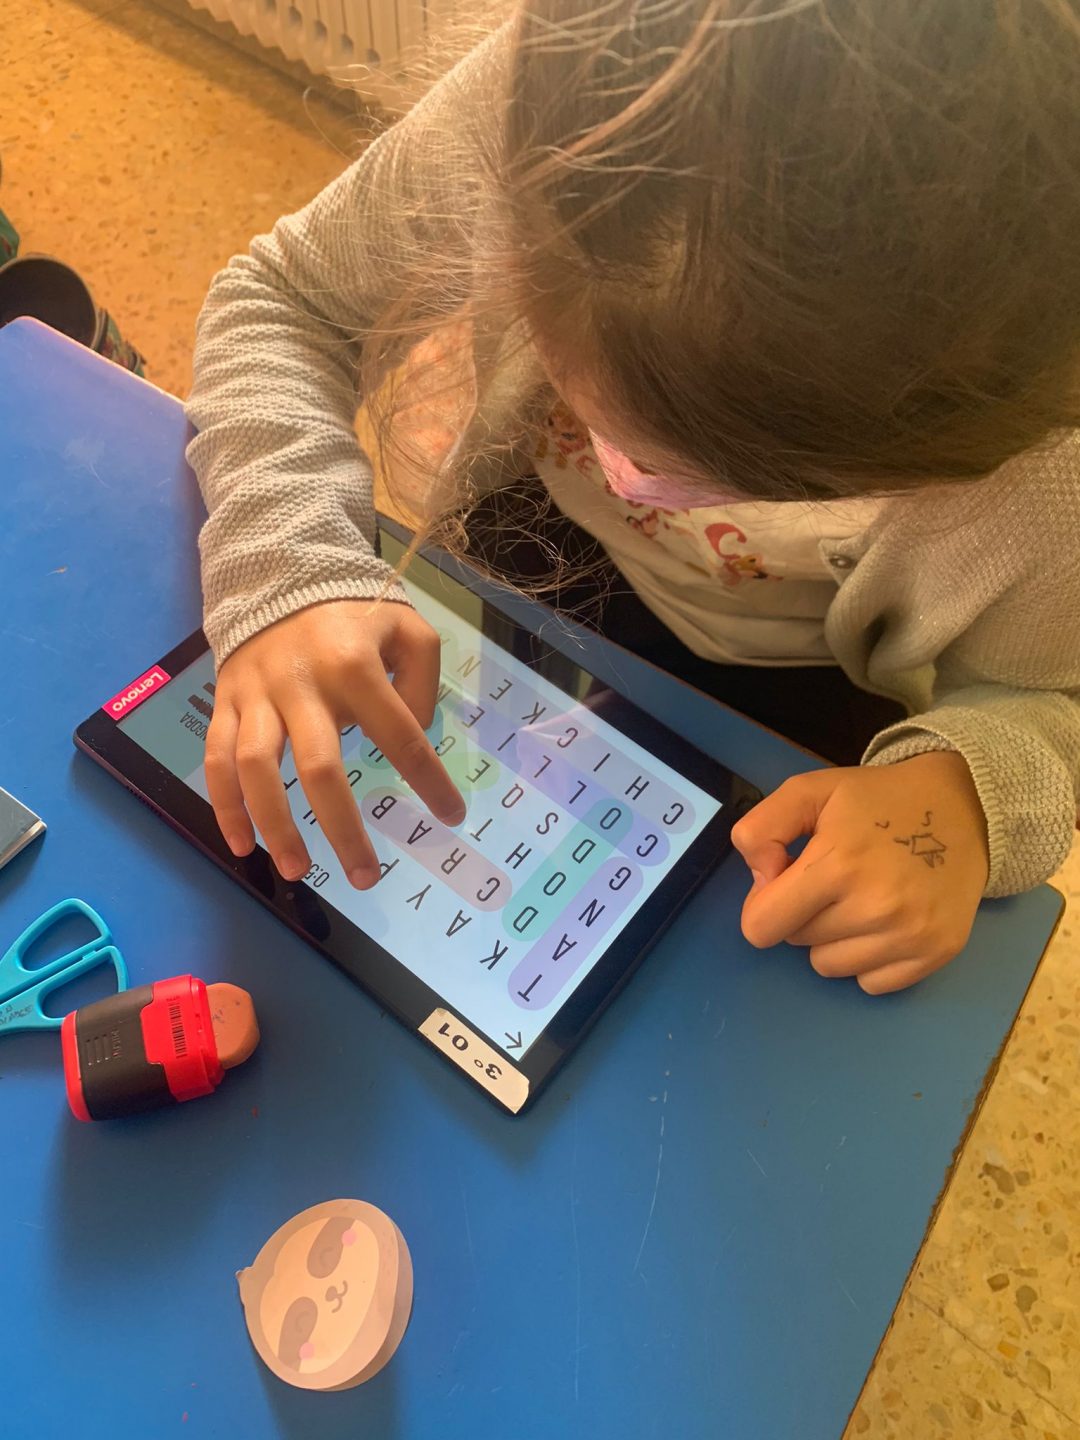 Protegido: 3ºEP: The children used their tablets in Technology class by playing games and practicing logical skills.